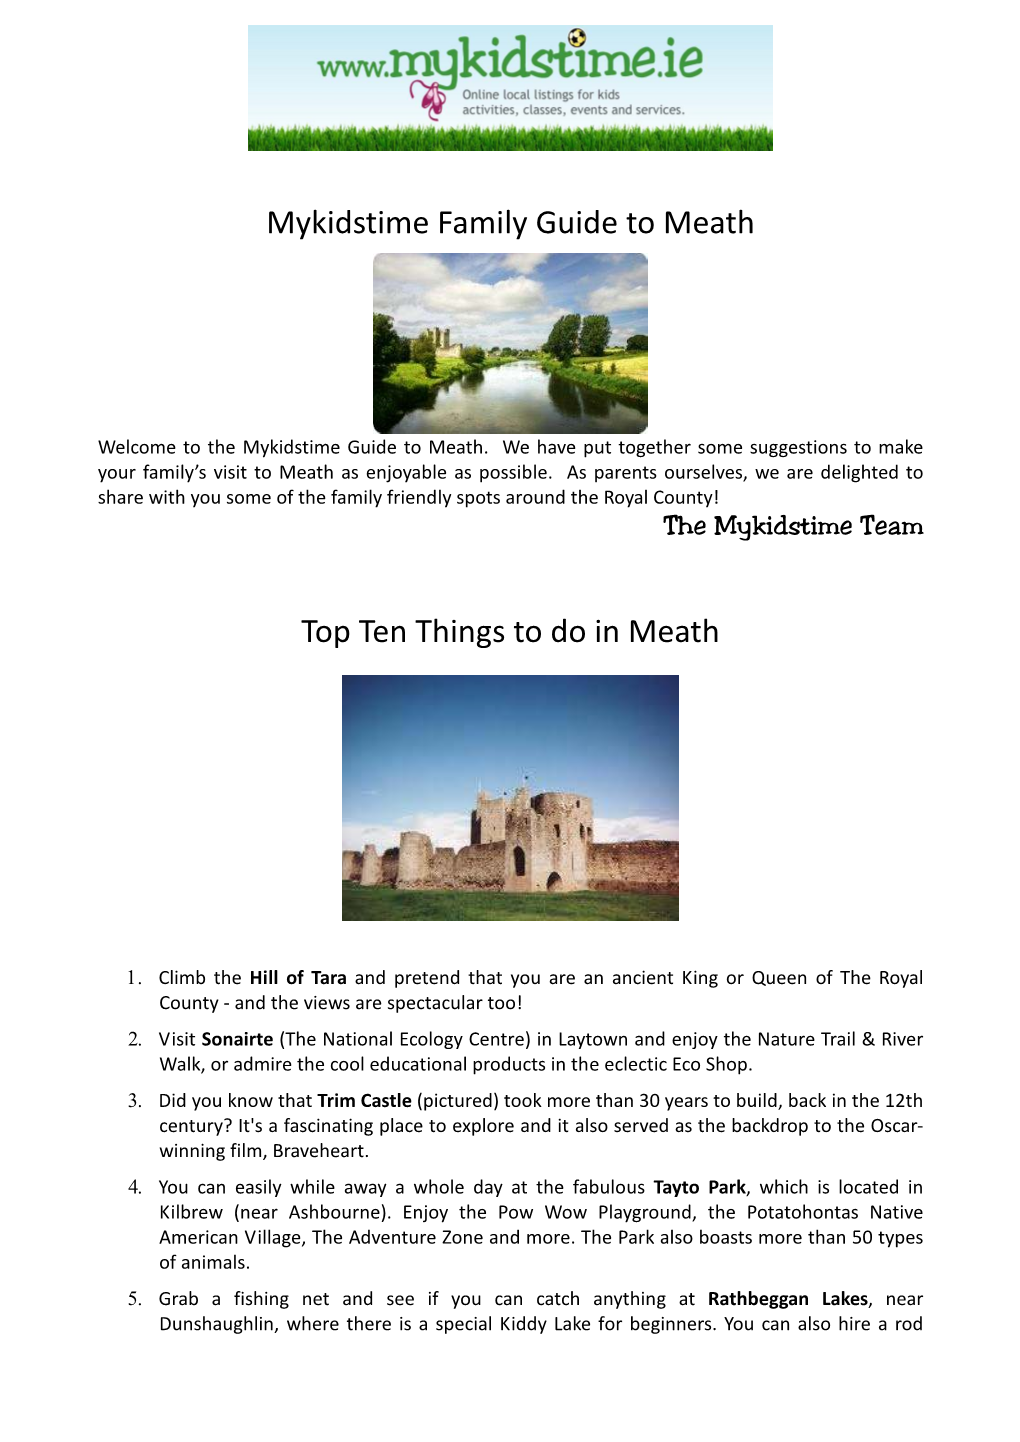 Mykidstime Family Guide to Meath Top Ten Things to Do in Meath